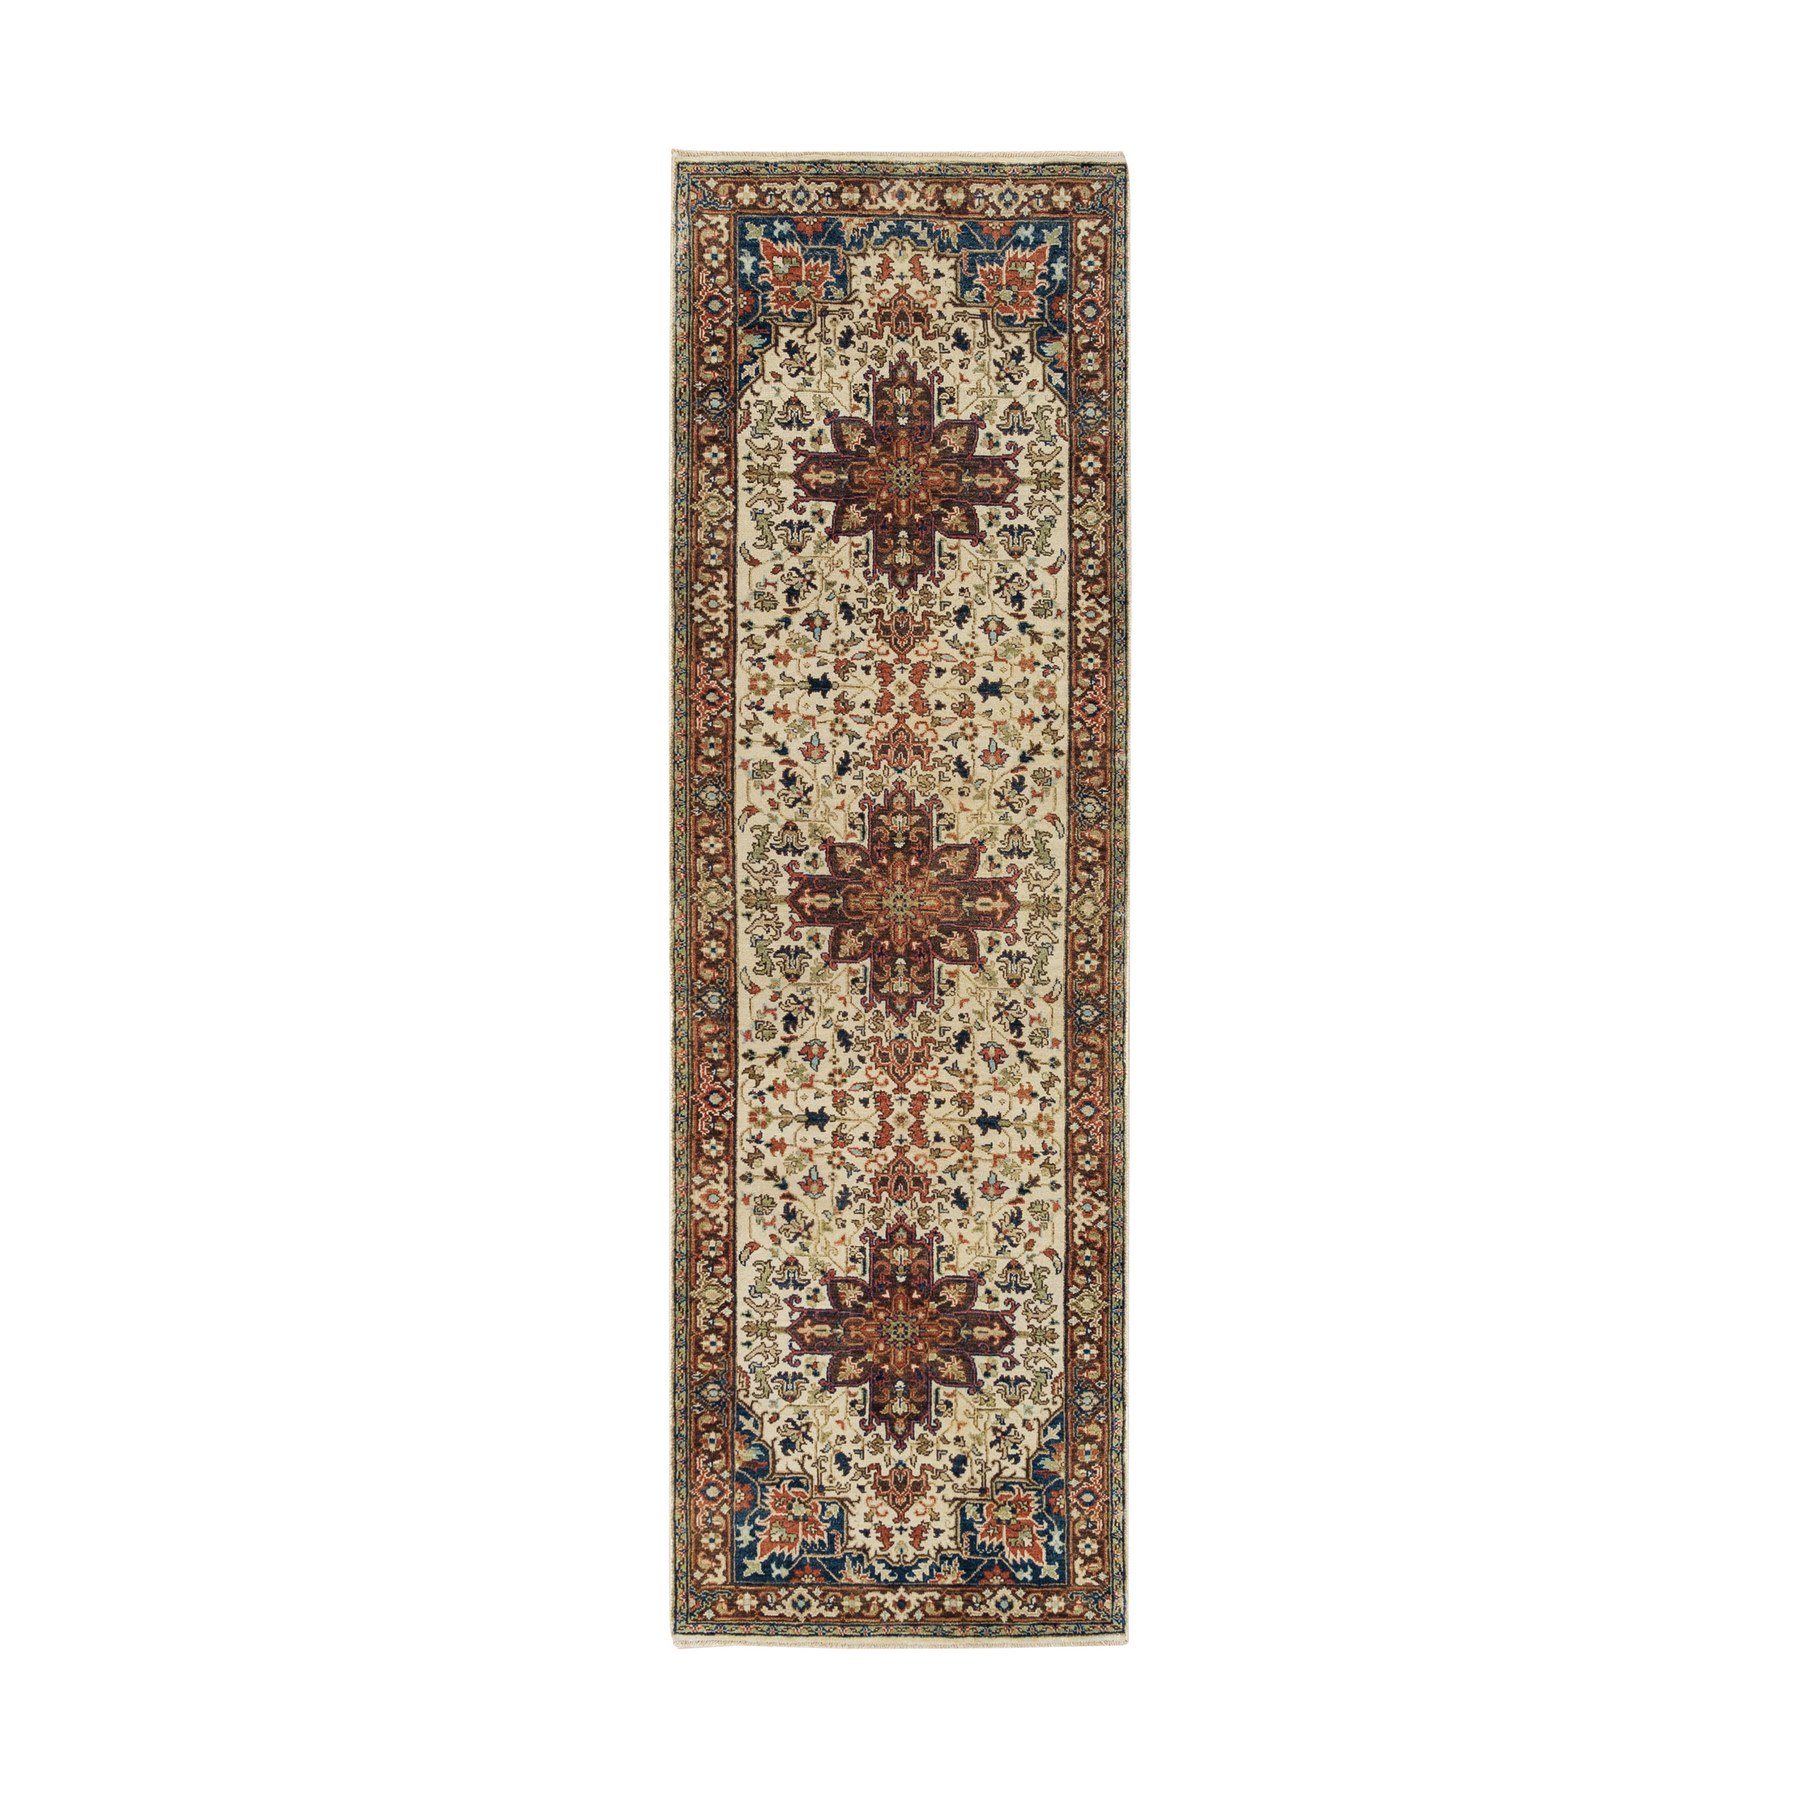  Wool Hand-Knotted Area Rug 2'8